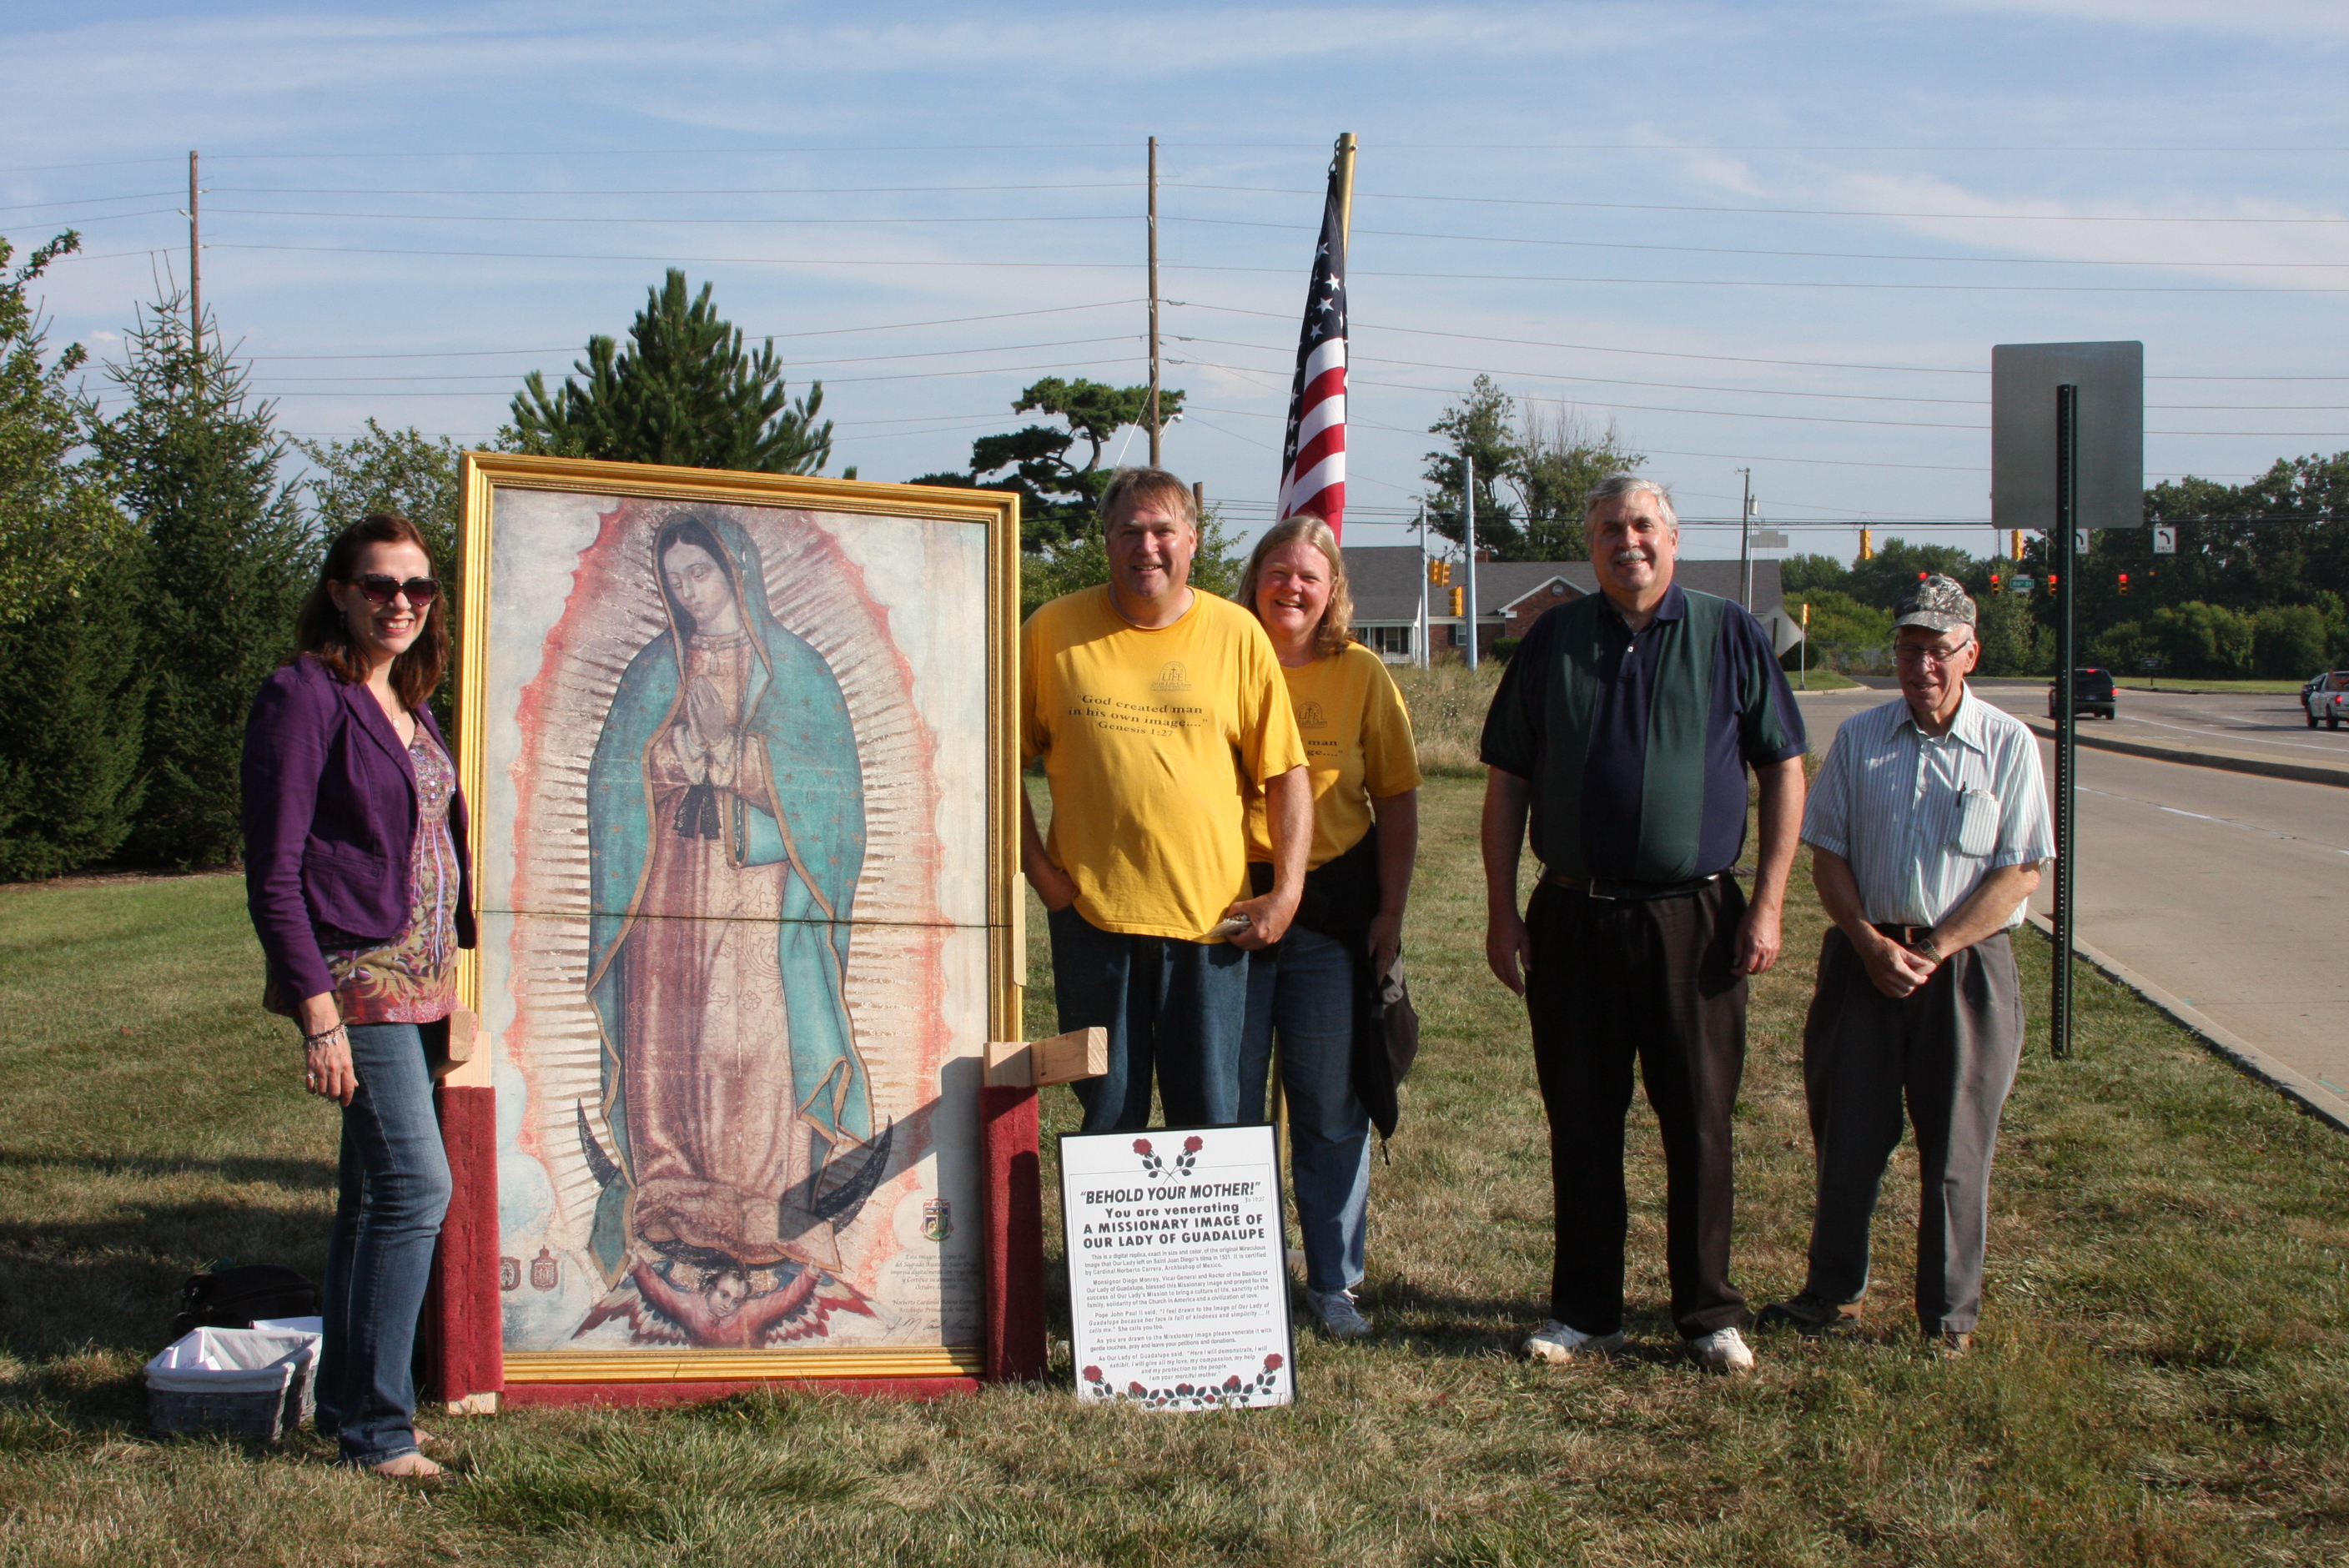 Missionary image of Our Lady of Guadalupe at Planned Parenthood